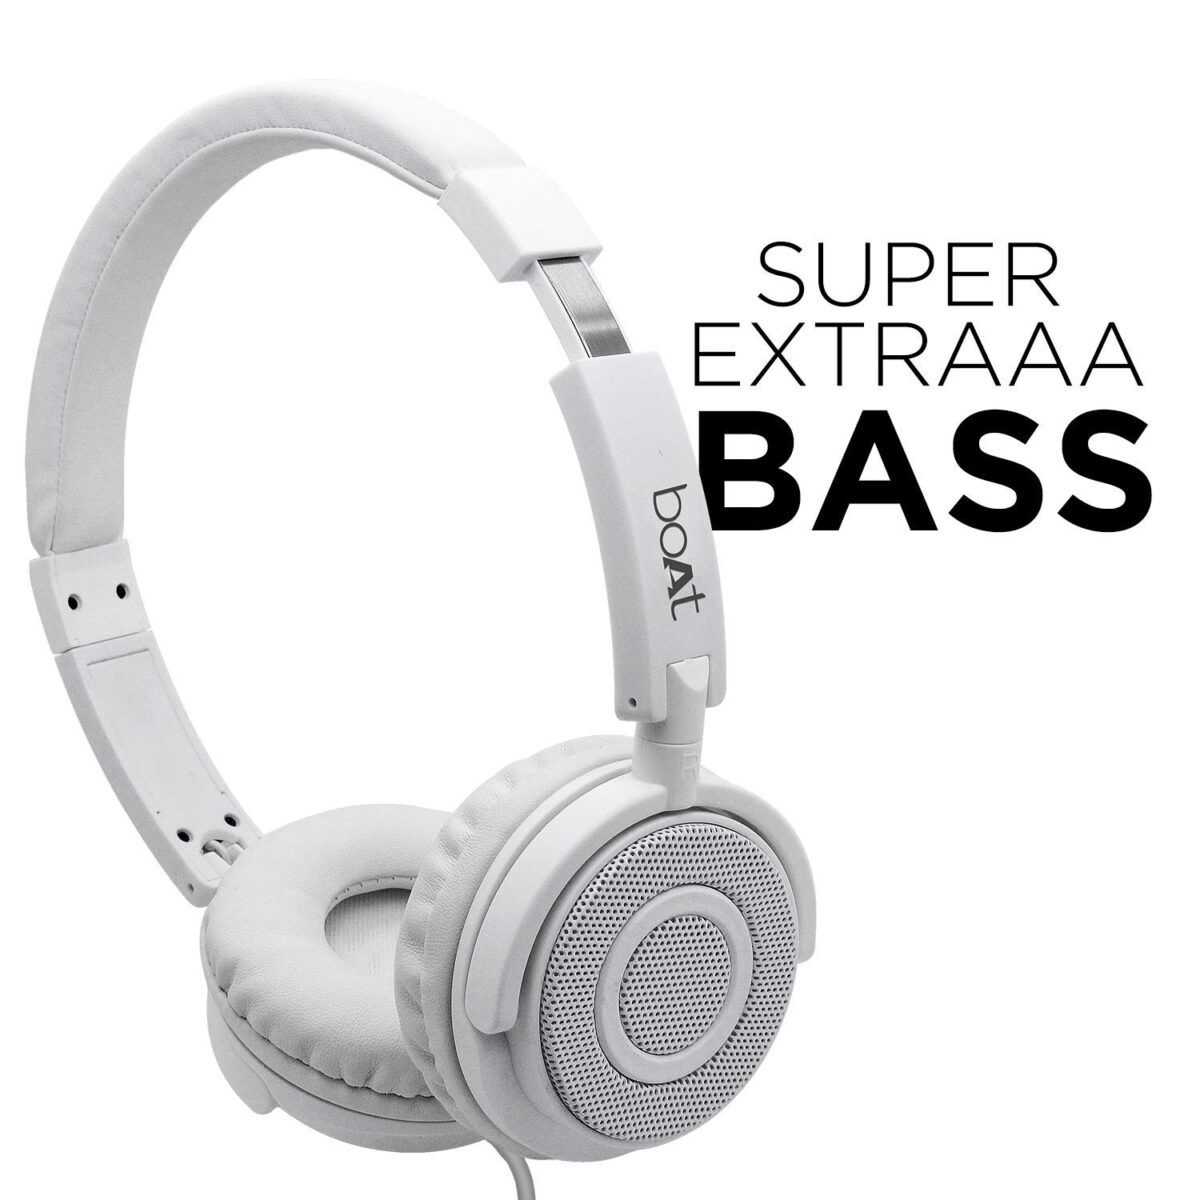 boAt Bassheads 900 On Ear Wired Headphones(Pearl White)